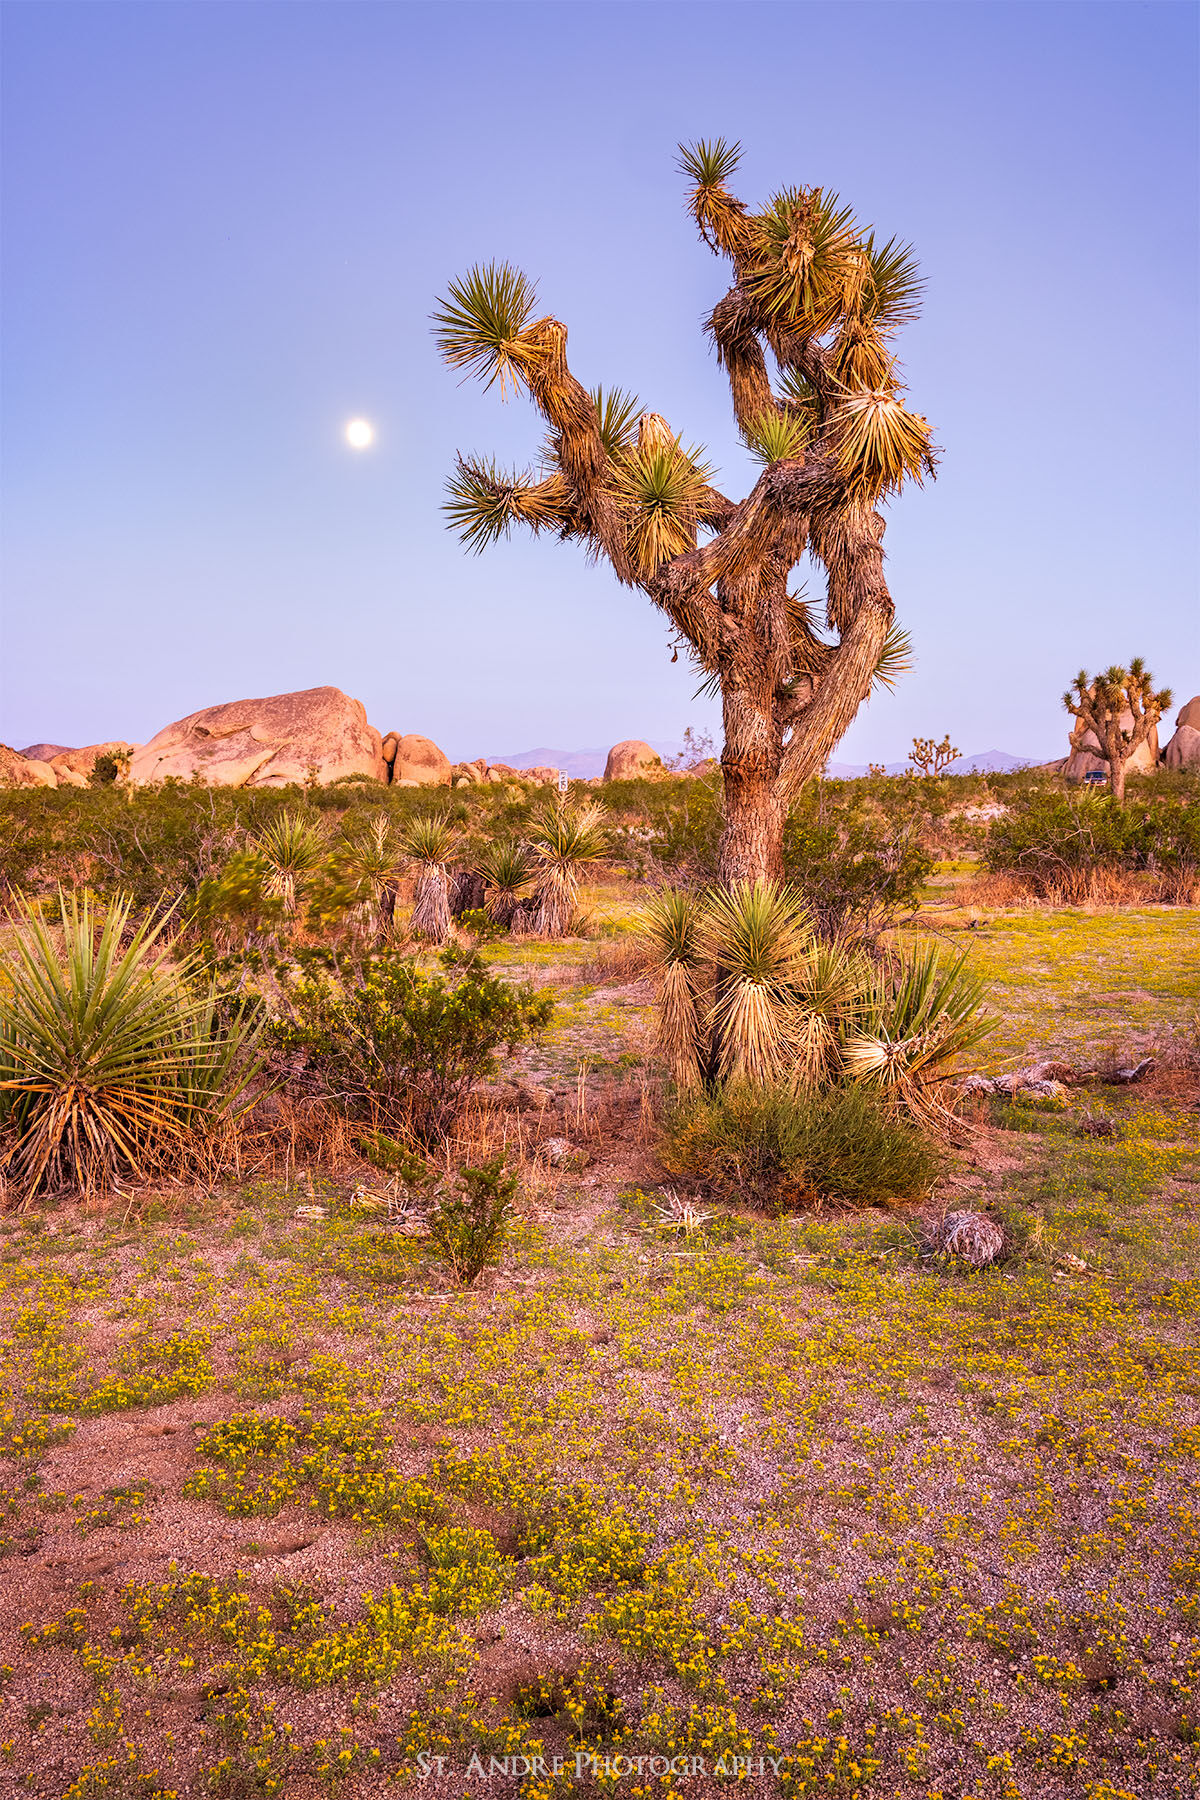 A Joshua Tree in Joshua Tree National Park stands in a field of other trees and a large blooming field of yellow flowers. The full moon is in the background. 